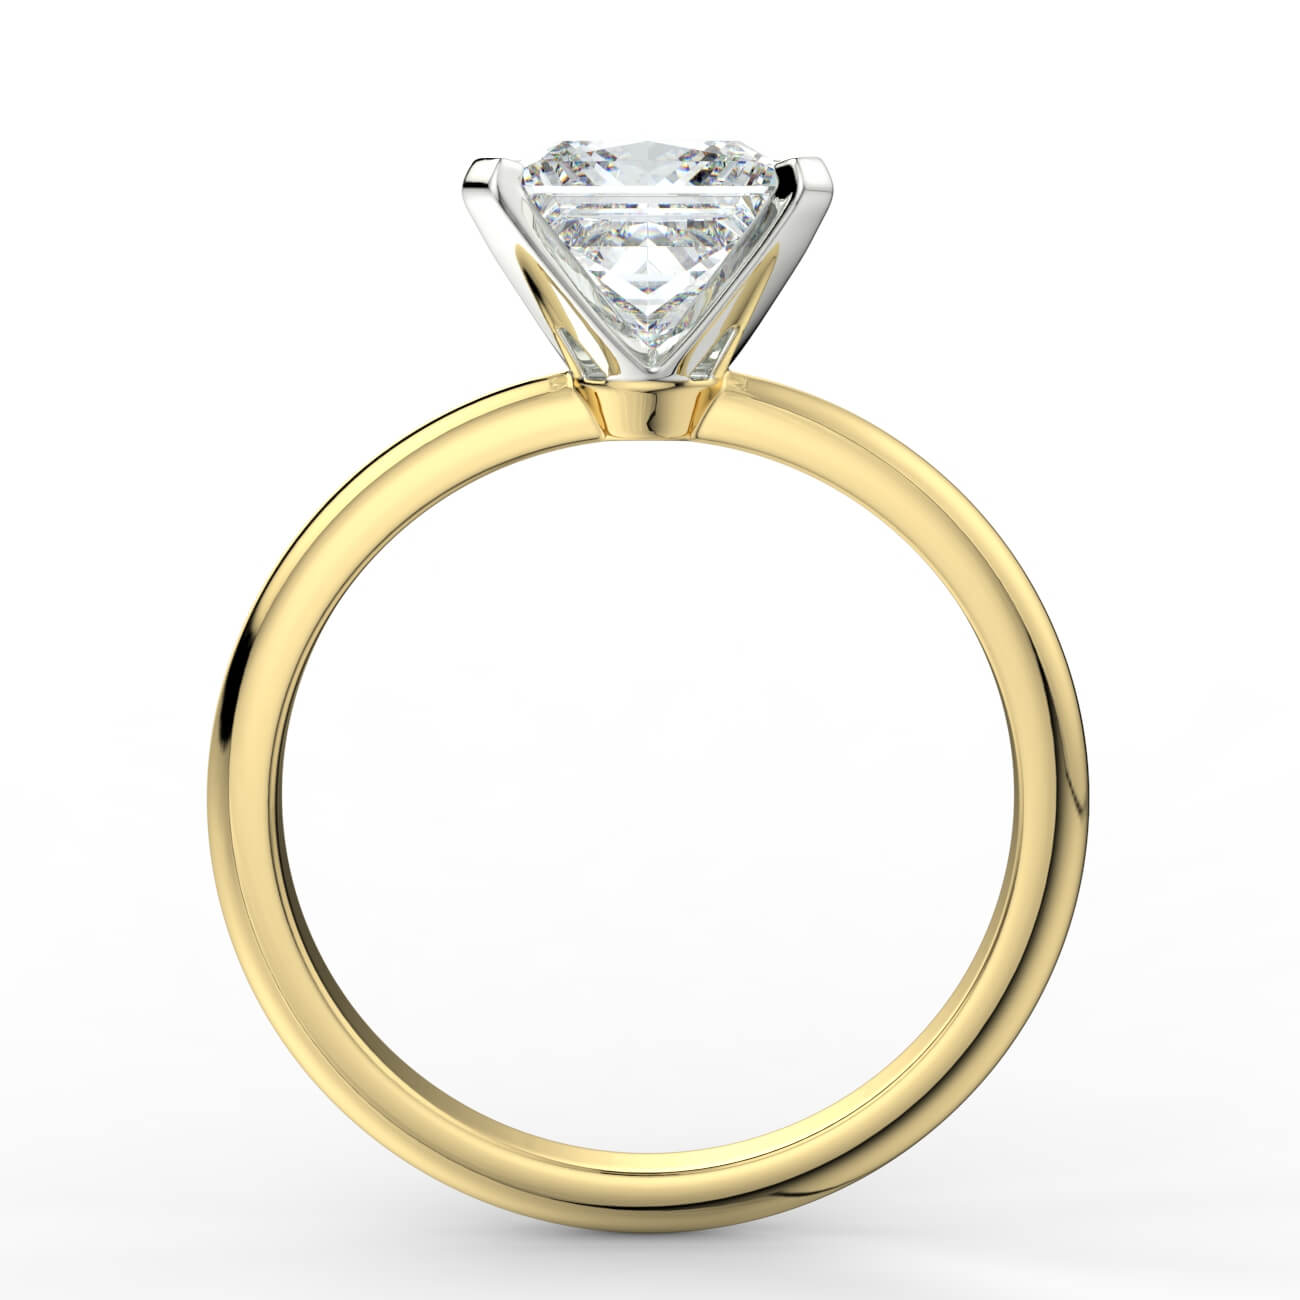 Knife-edge solitaire princess cut diamond engagement ring in yellow and white gold – Australian Diamond Network